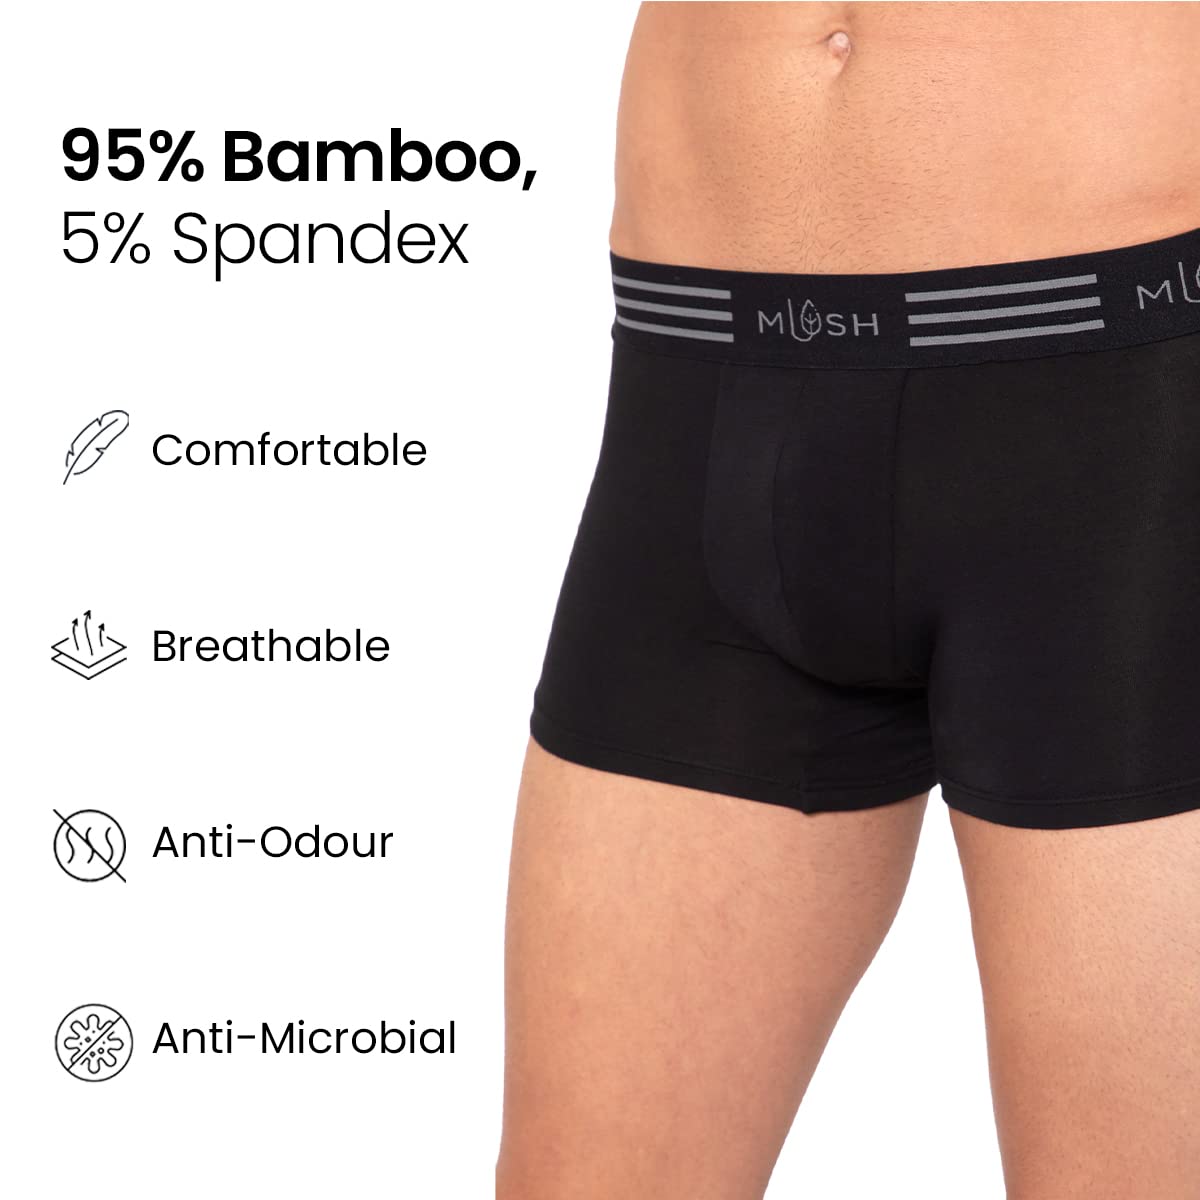 Mush Ultra Soft, Breathable, Feather Light Men's Bamboo Trunk || Naturally Anti-Odor and Anti-Microbial Bamboo Innerwear Pack of 3 (XL, Black)